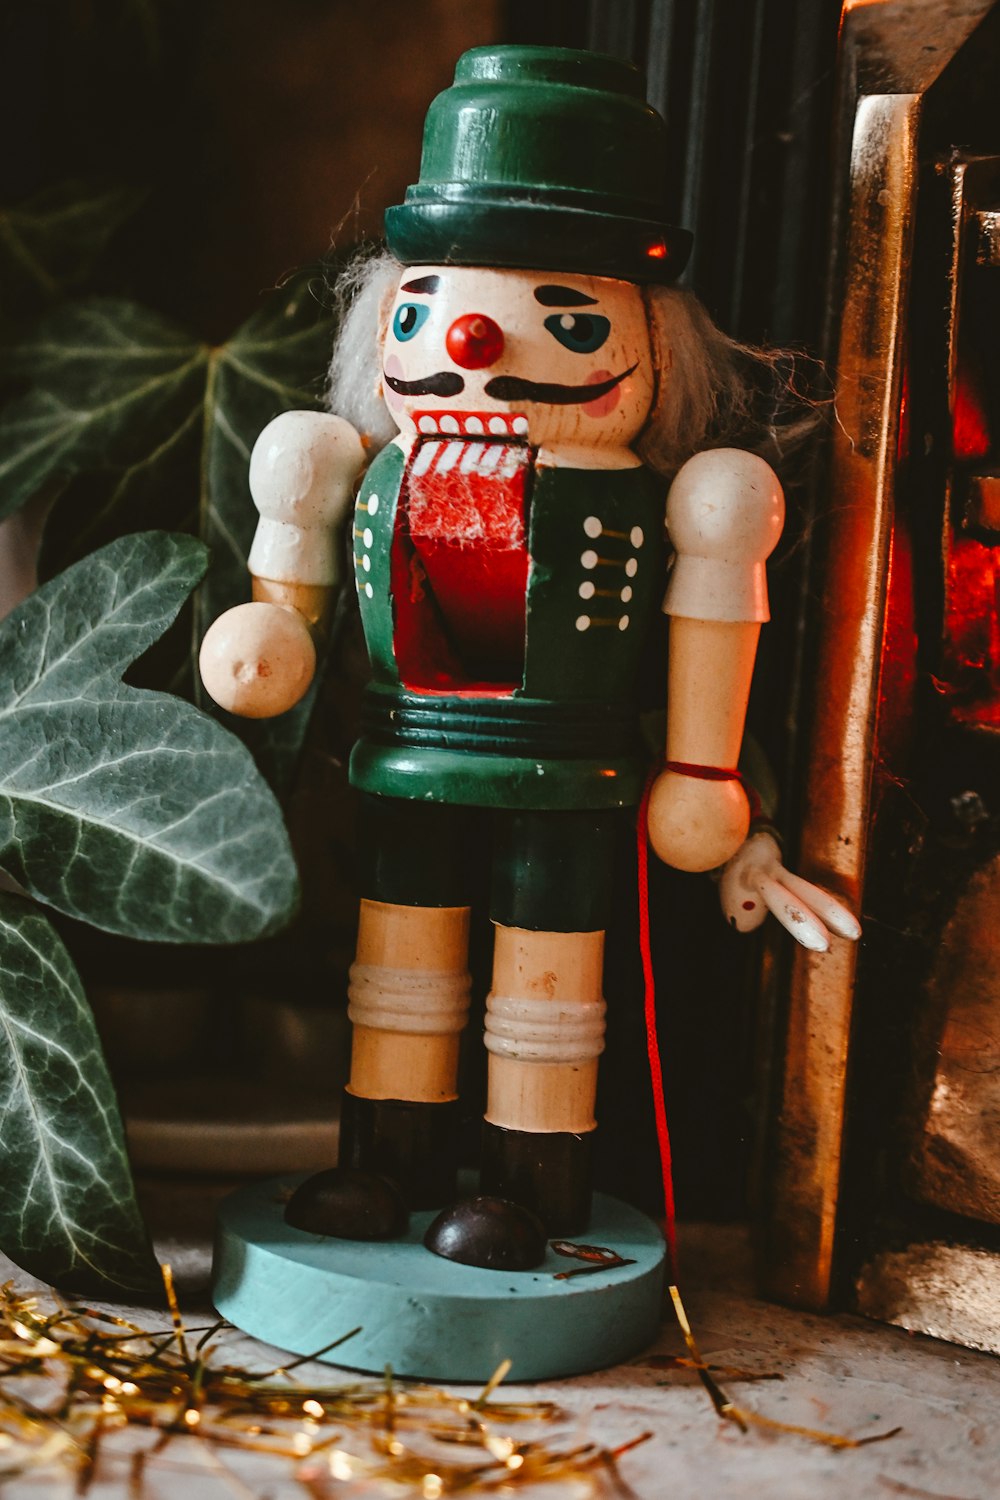 a wooden nutcracker standing next to a plant